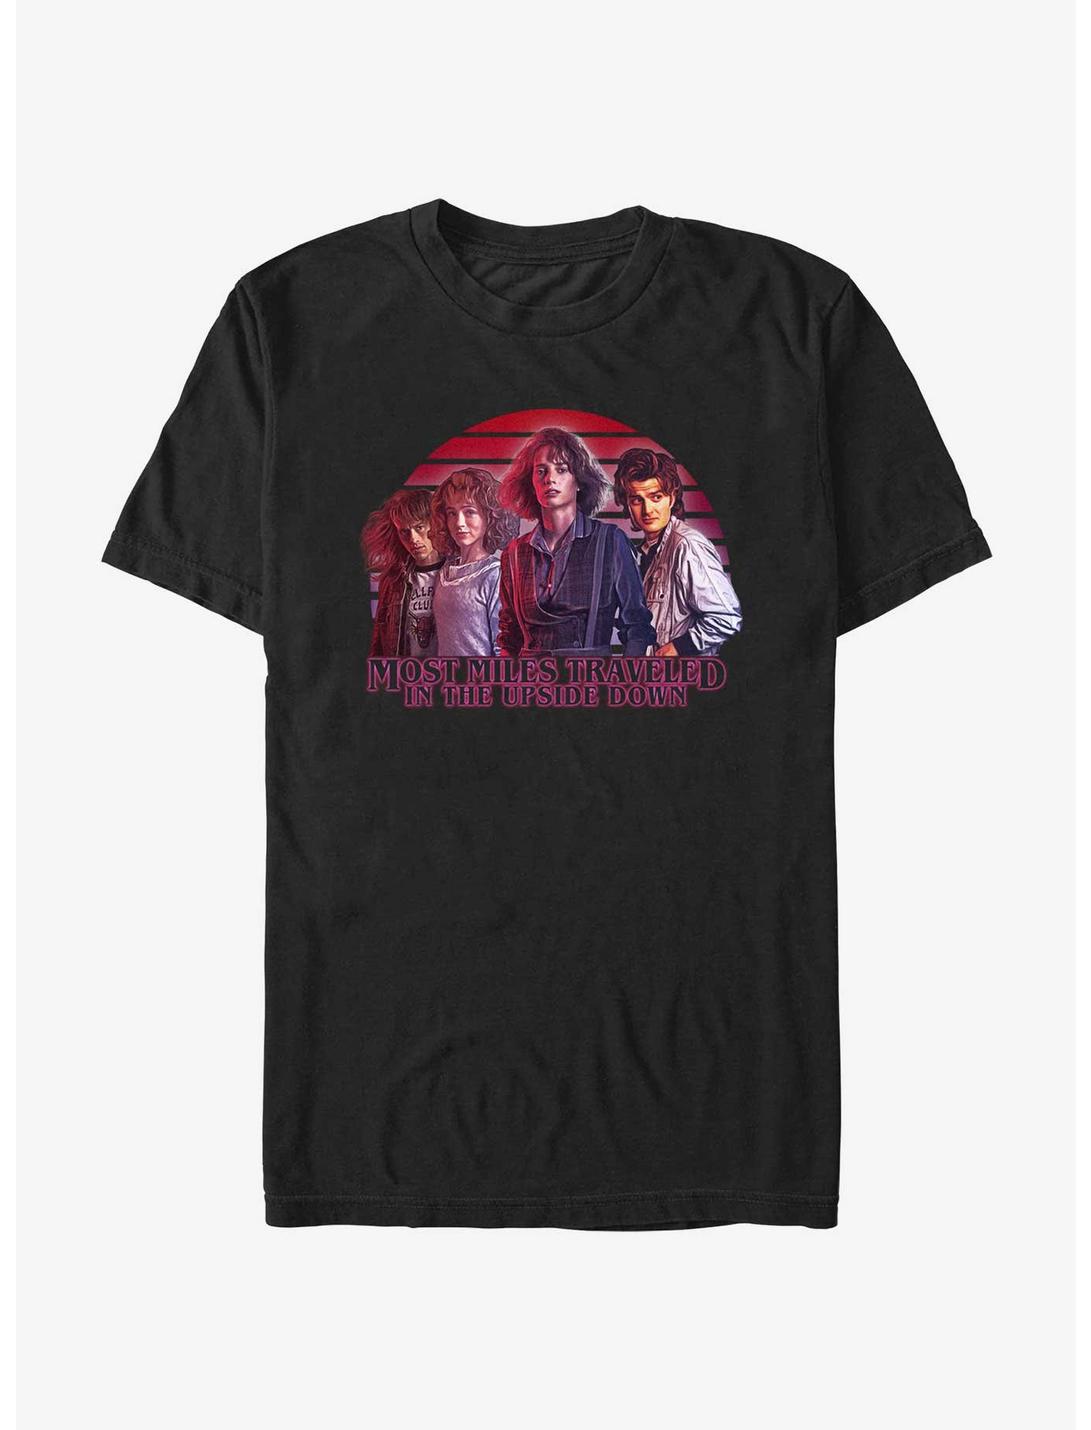 Stranger Things Most Miles Traveled In The Upside Down T-Shirt, BLACK, hi-res